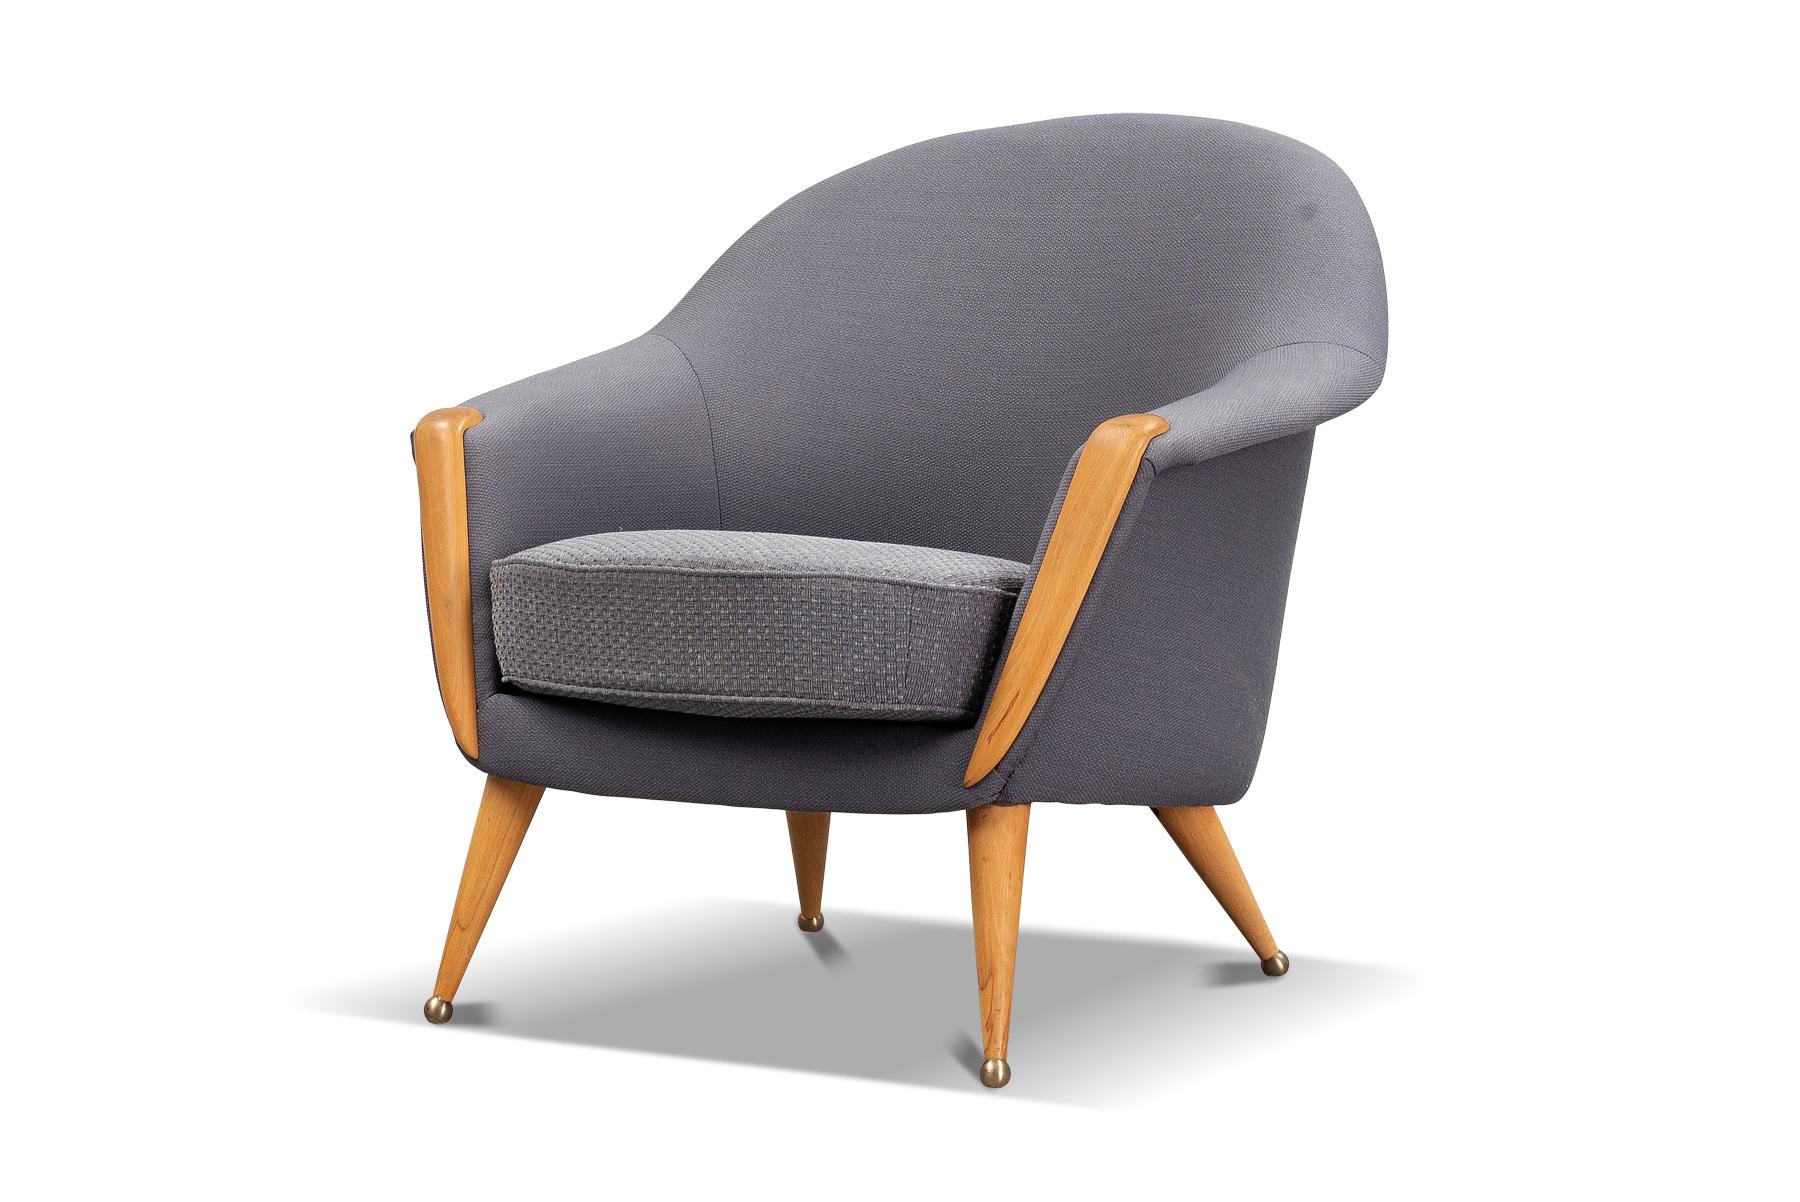 Other “Orion” Lounge Chair By Folke Jansson